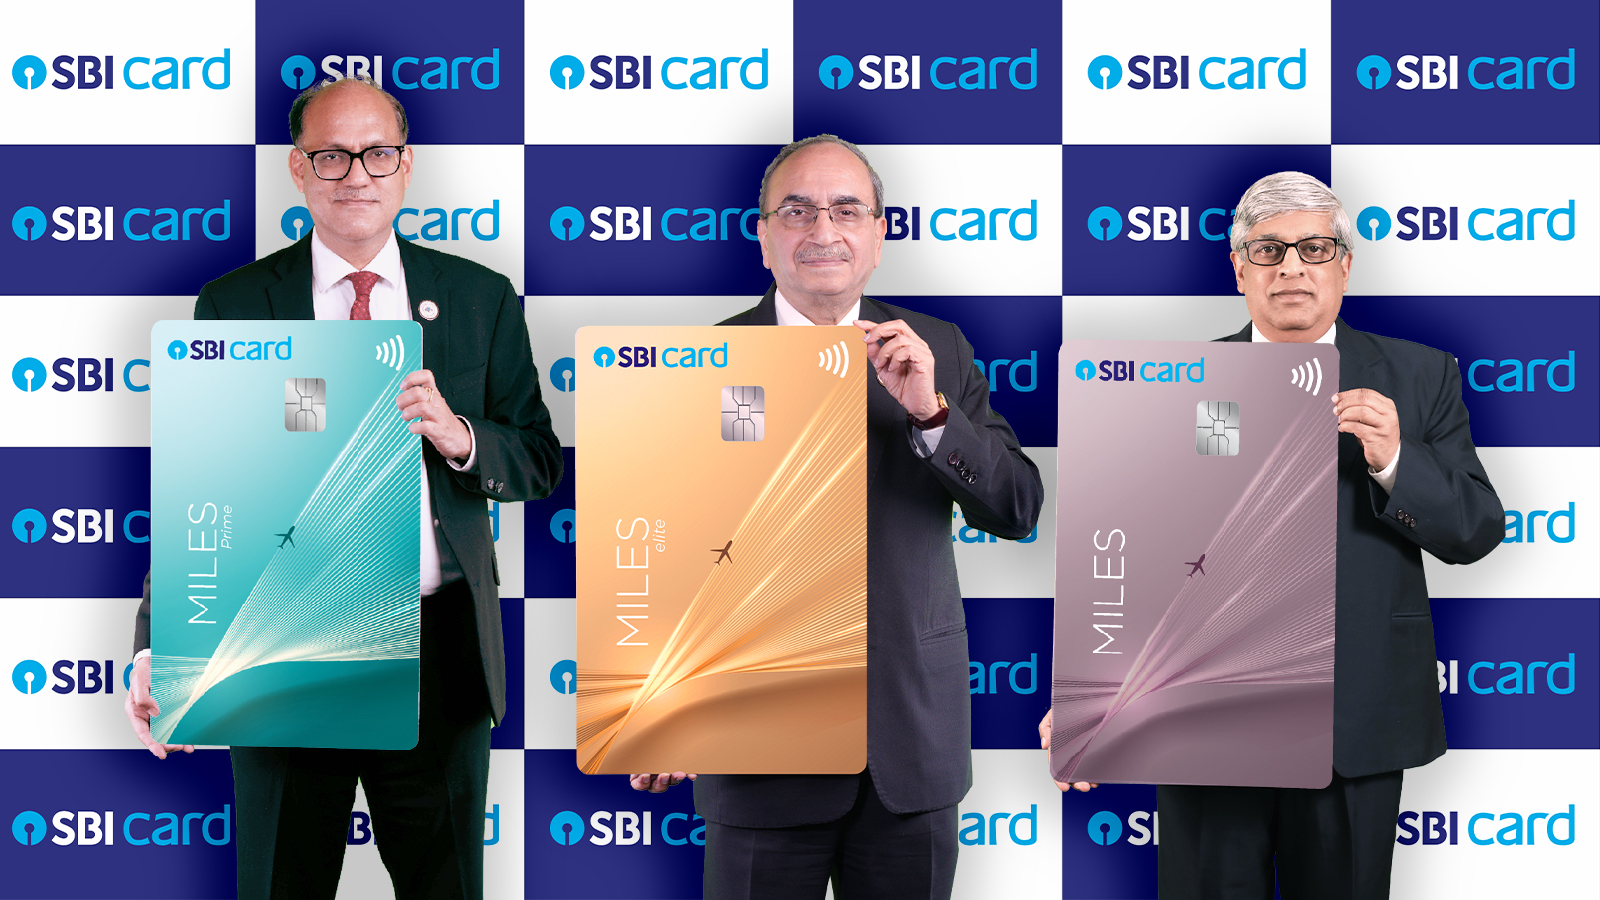 SBI Card unveils 3 variants of ‘SBI Card MILES’ for travellers